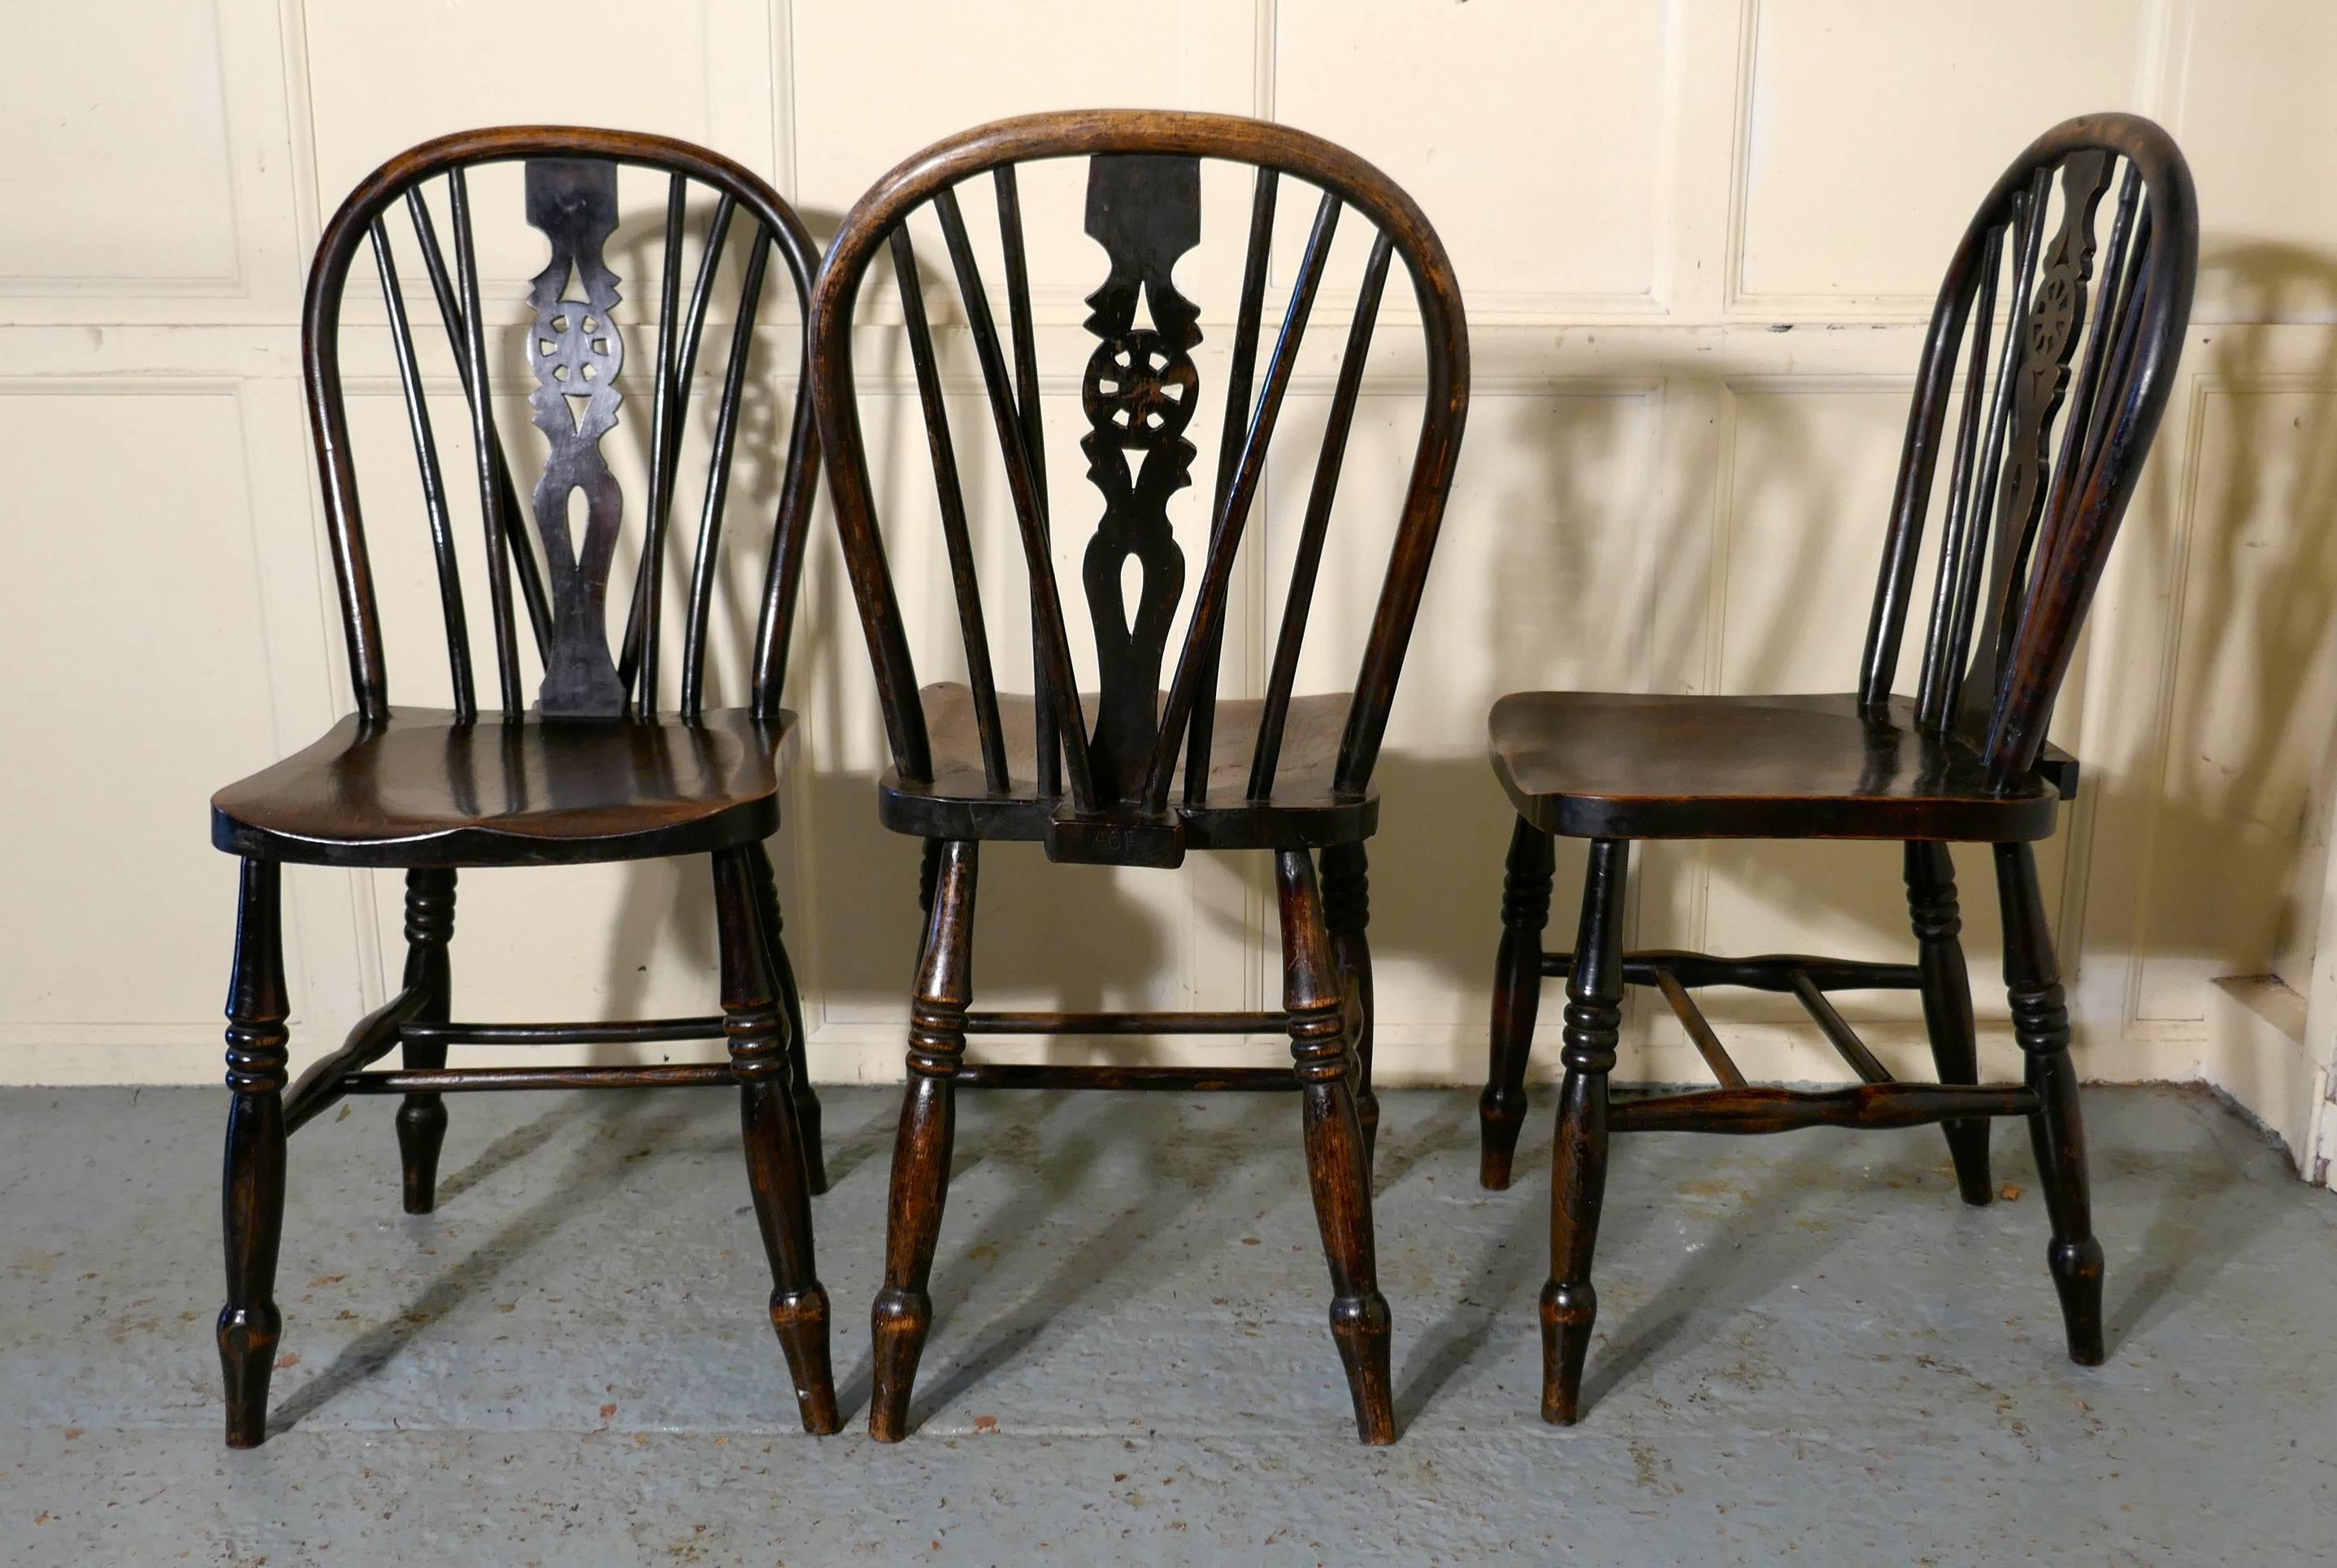 A set of six early Victorian beech and elm wheel back kitchen chairs

The chairs are a Classic design, they have saddle shaped seats, a double stretcher underneath, hooped backs in the traditional Windsor style with a wheel design set in to the